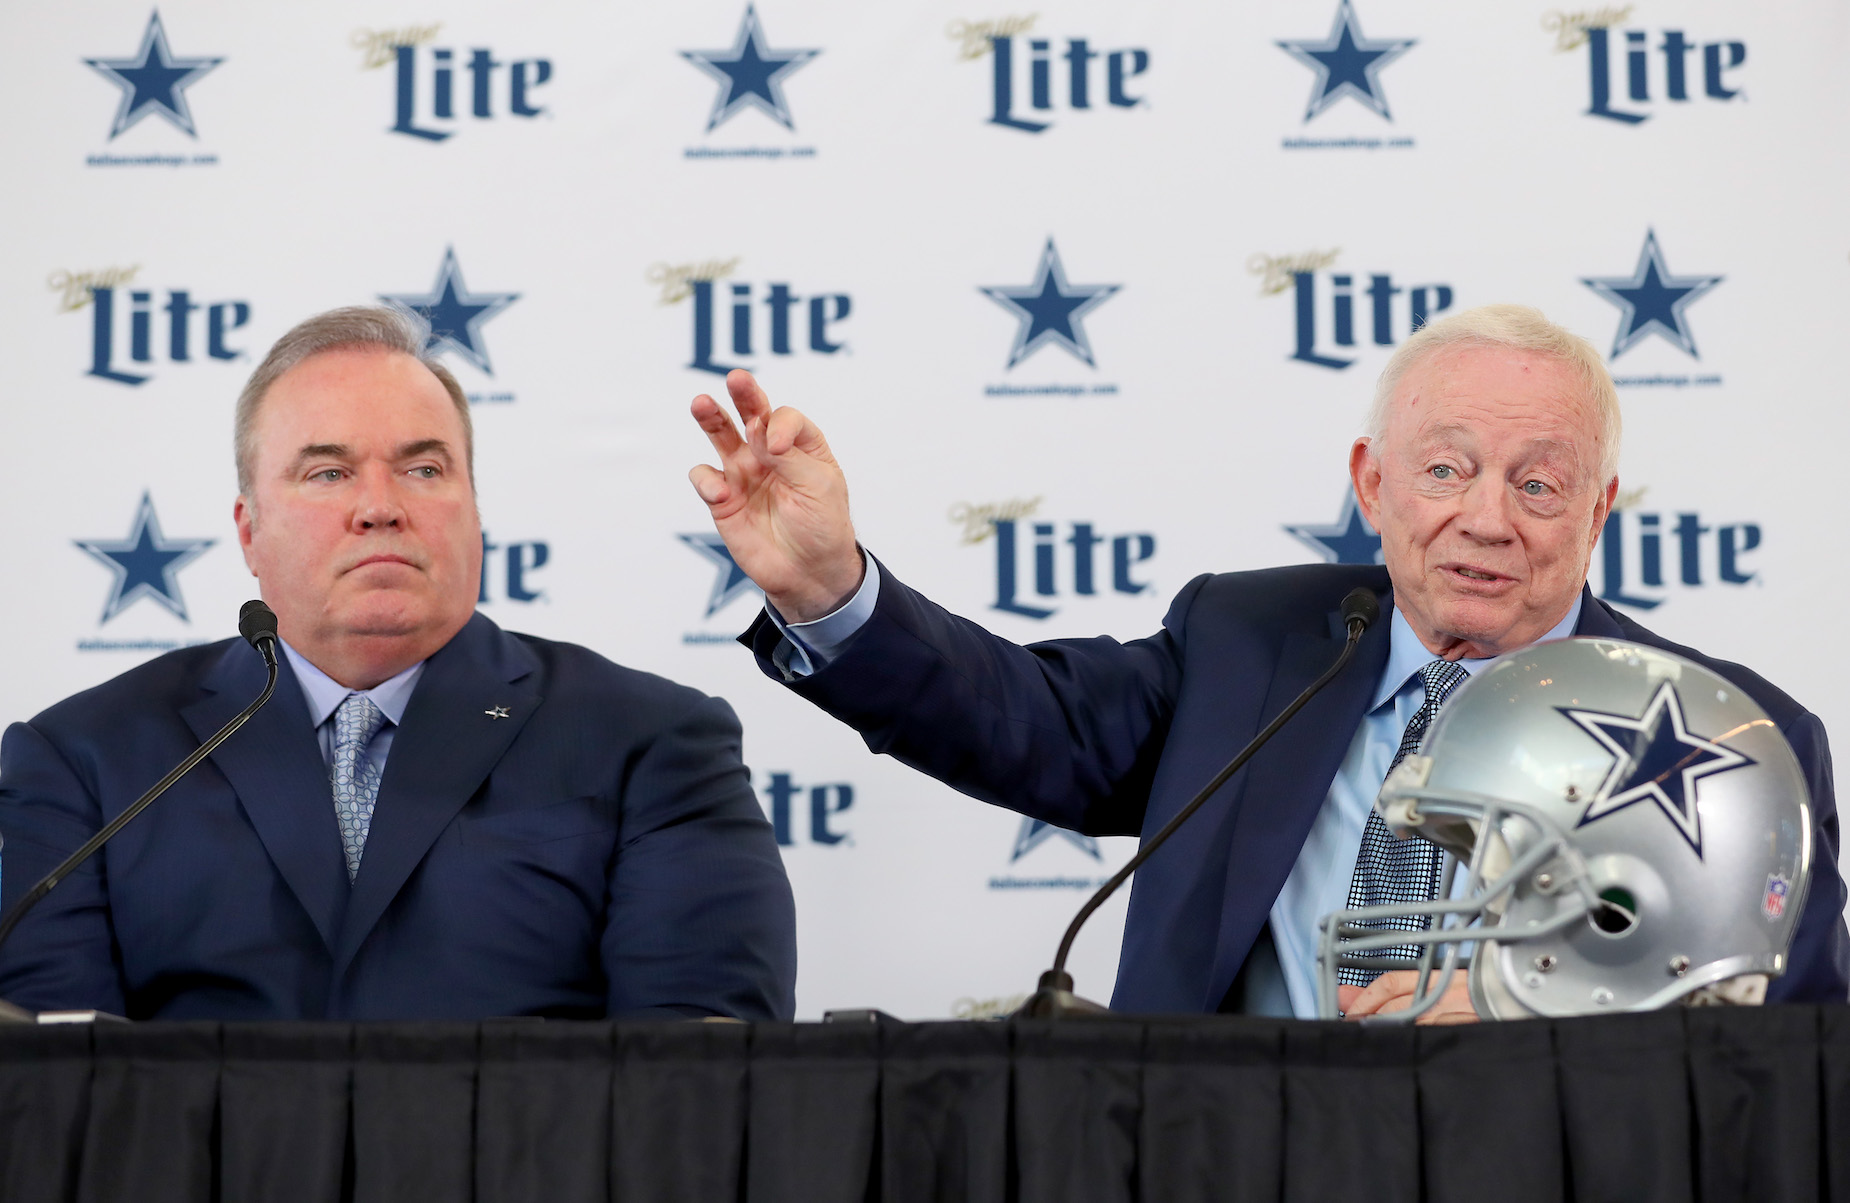 Jerry Jones may have hired Mike McCarthy due to some bad advice from an NFL insider.